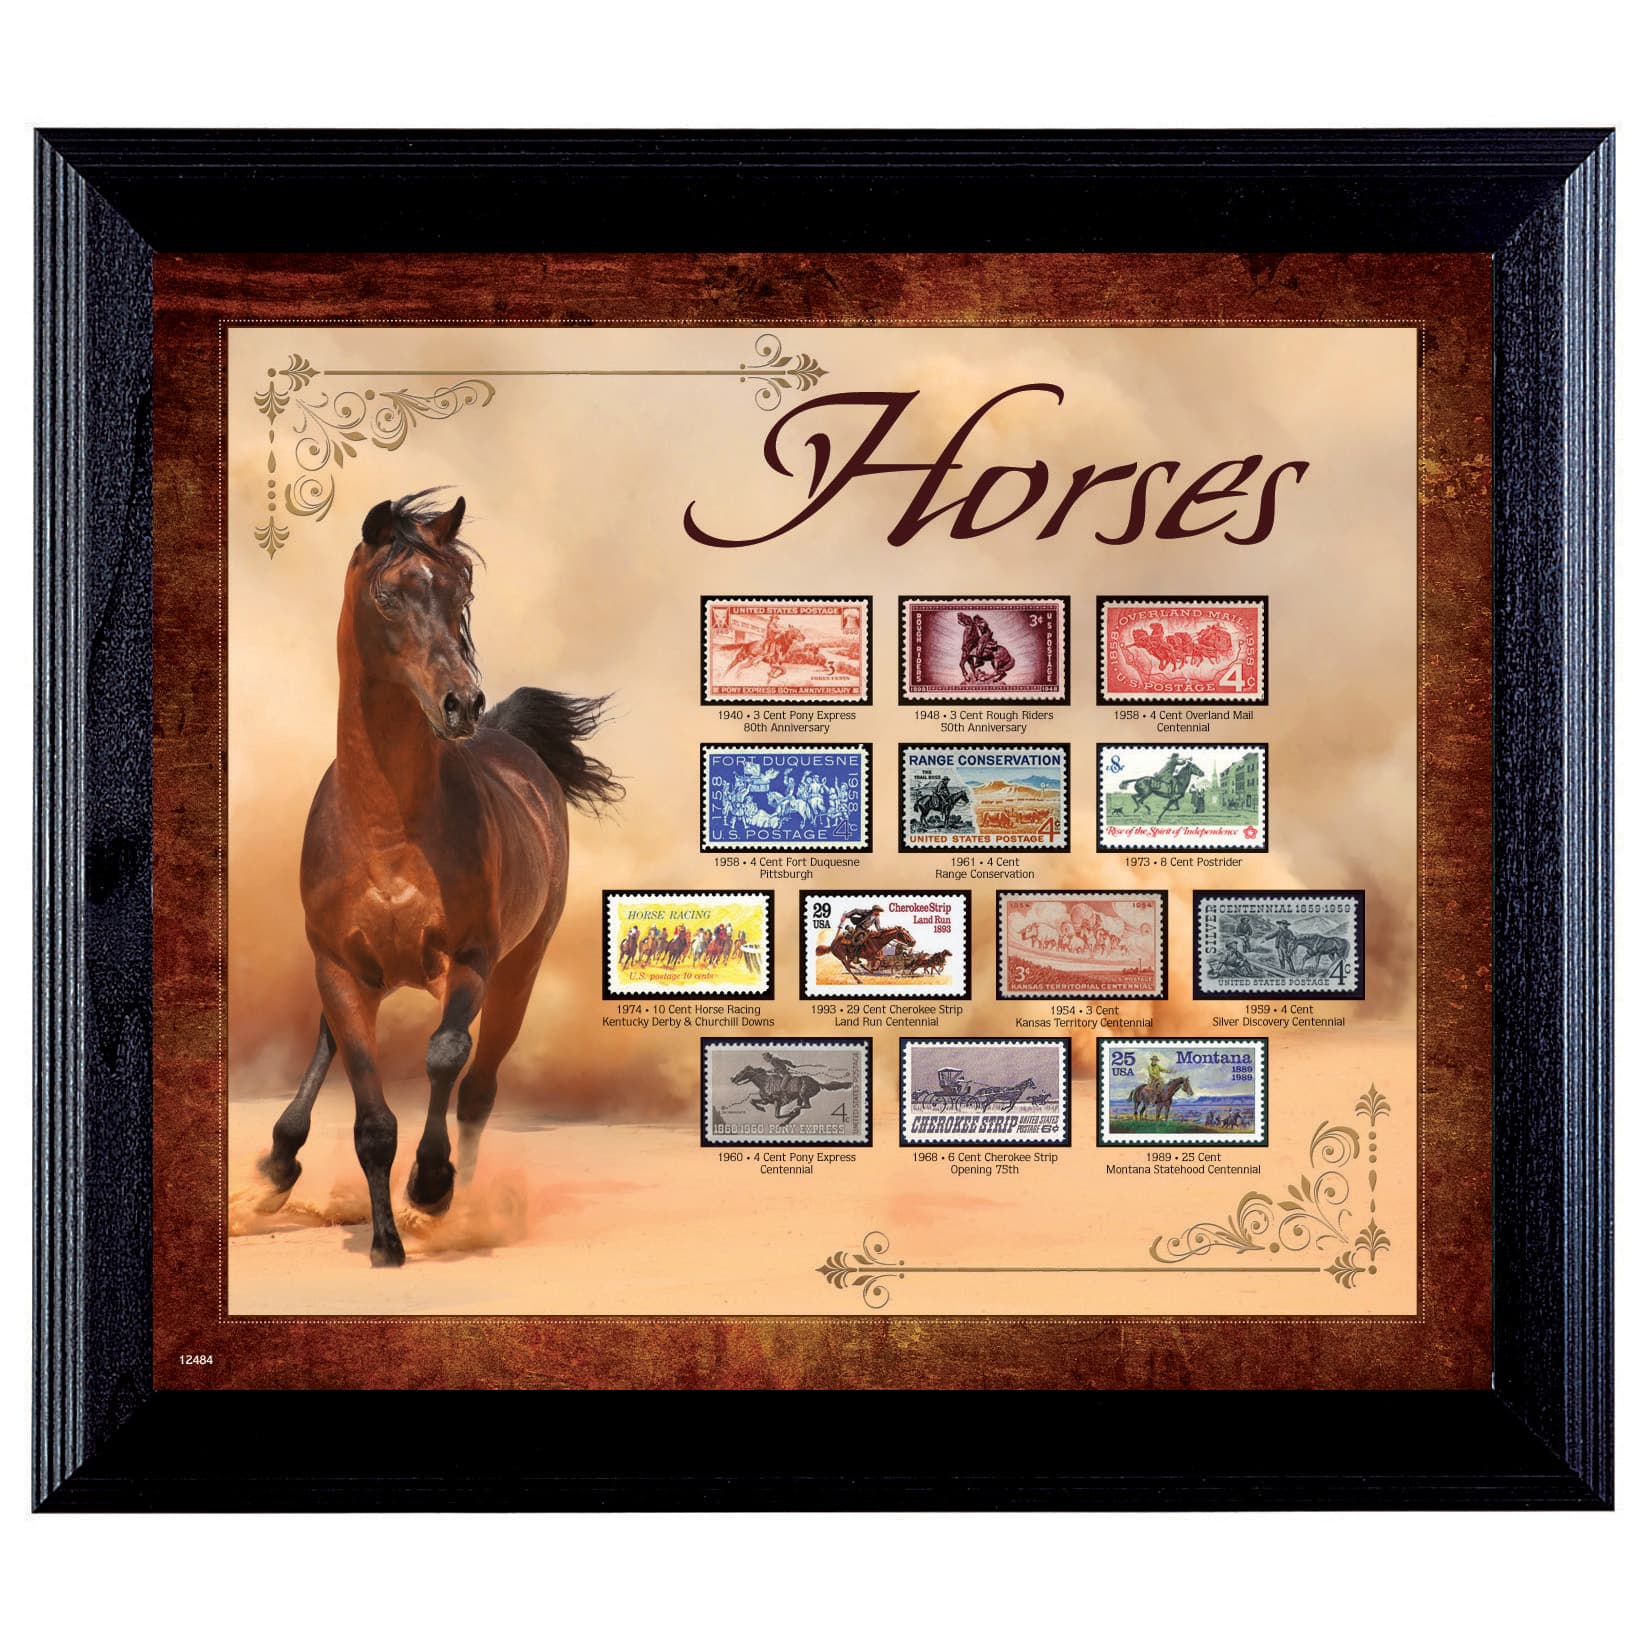 Horses on Stamps in Wall Frame